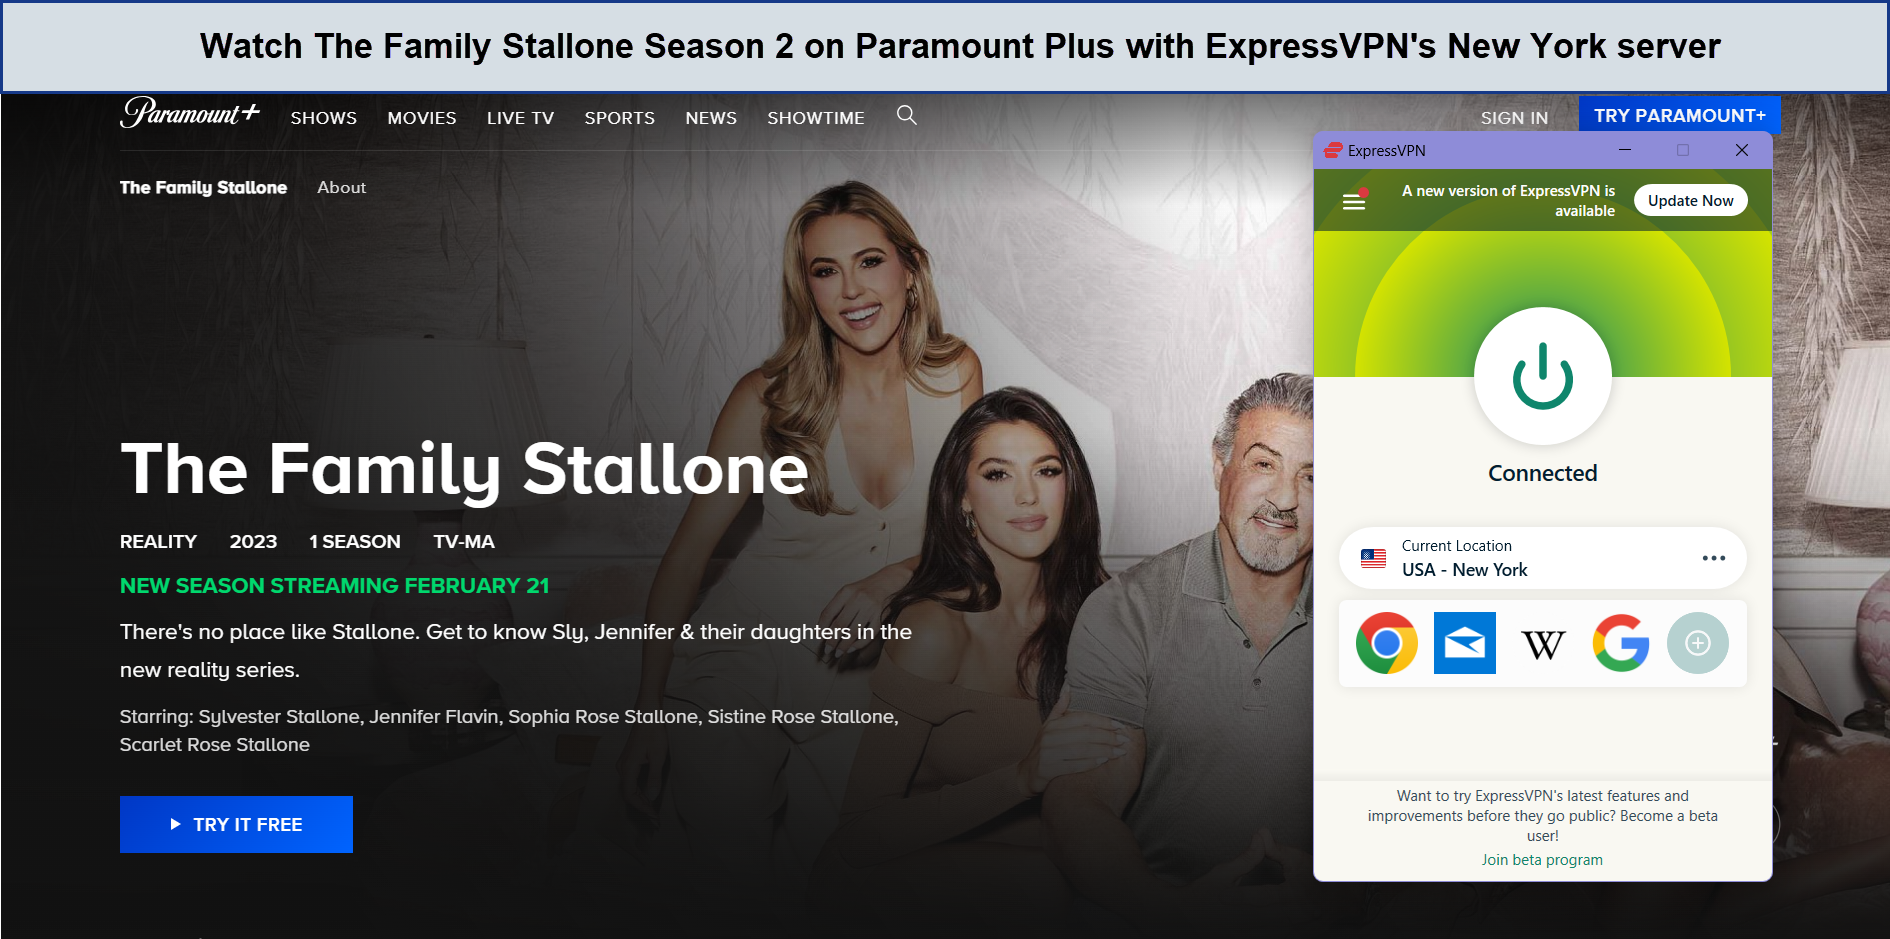 Watch-The-Family-Stallone-Season-2-on-Paramount-Plus-with-ExpressVPN-in-Spain